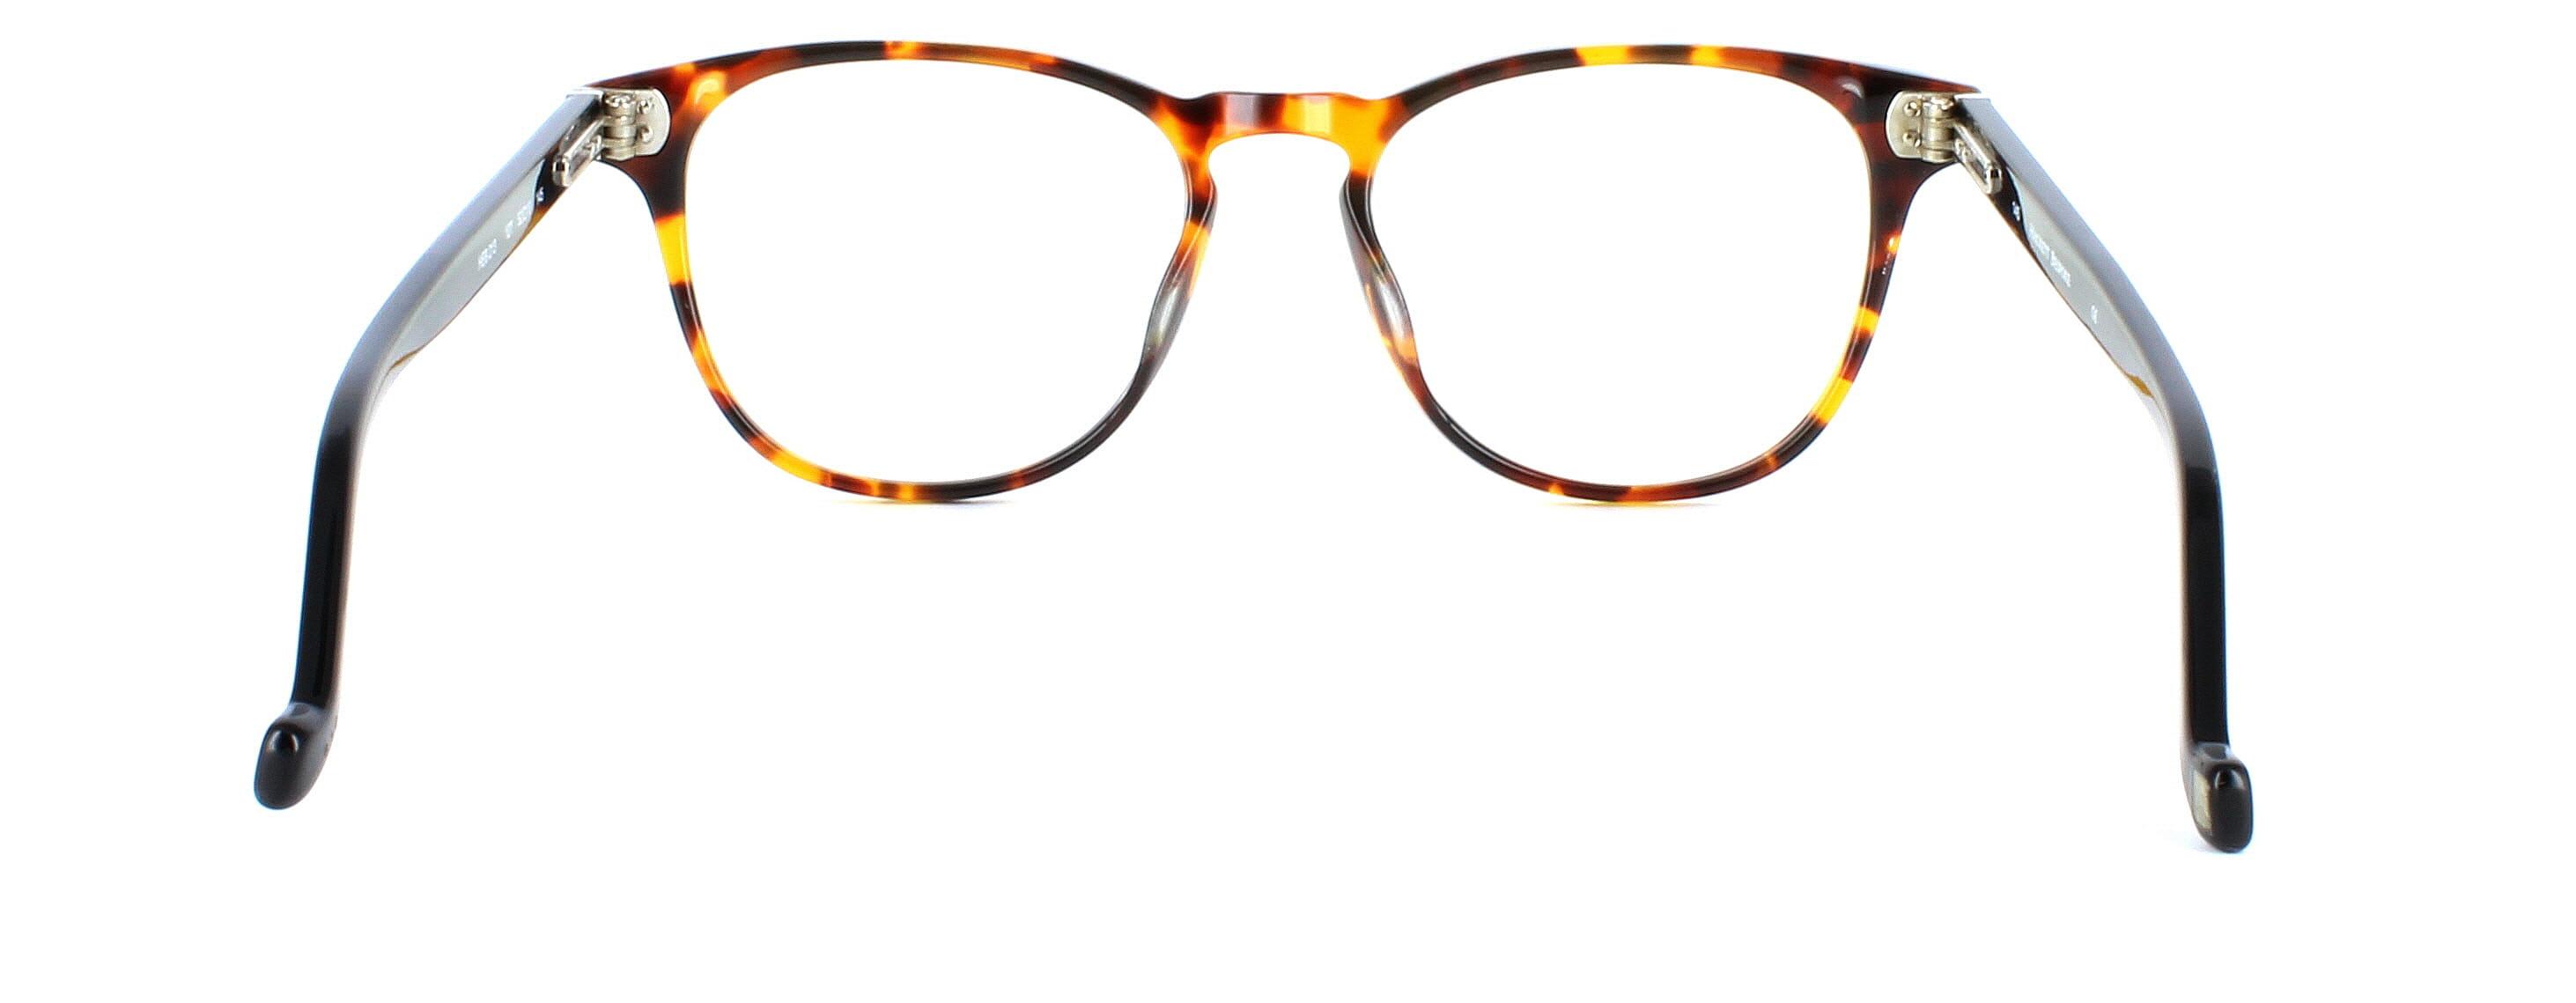 Hackett HEB 213 - Unisex acetate with tortoise face and black arms - image view 3